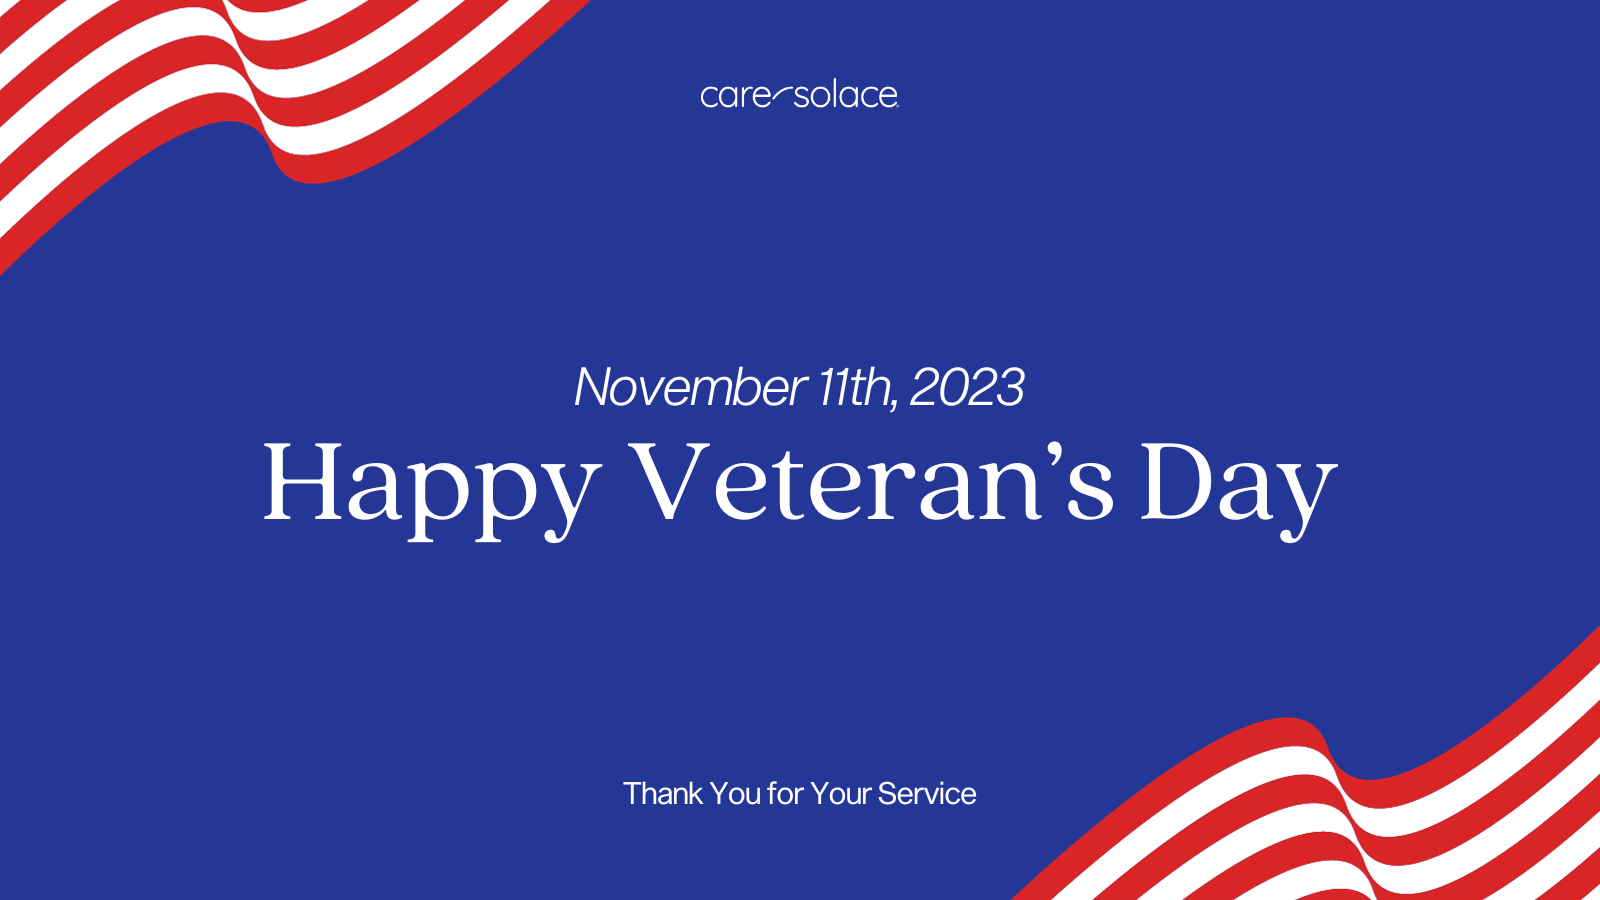 Care Solace - November 11th, 2023 - Happy Veteran's Day - Thank you for your service